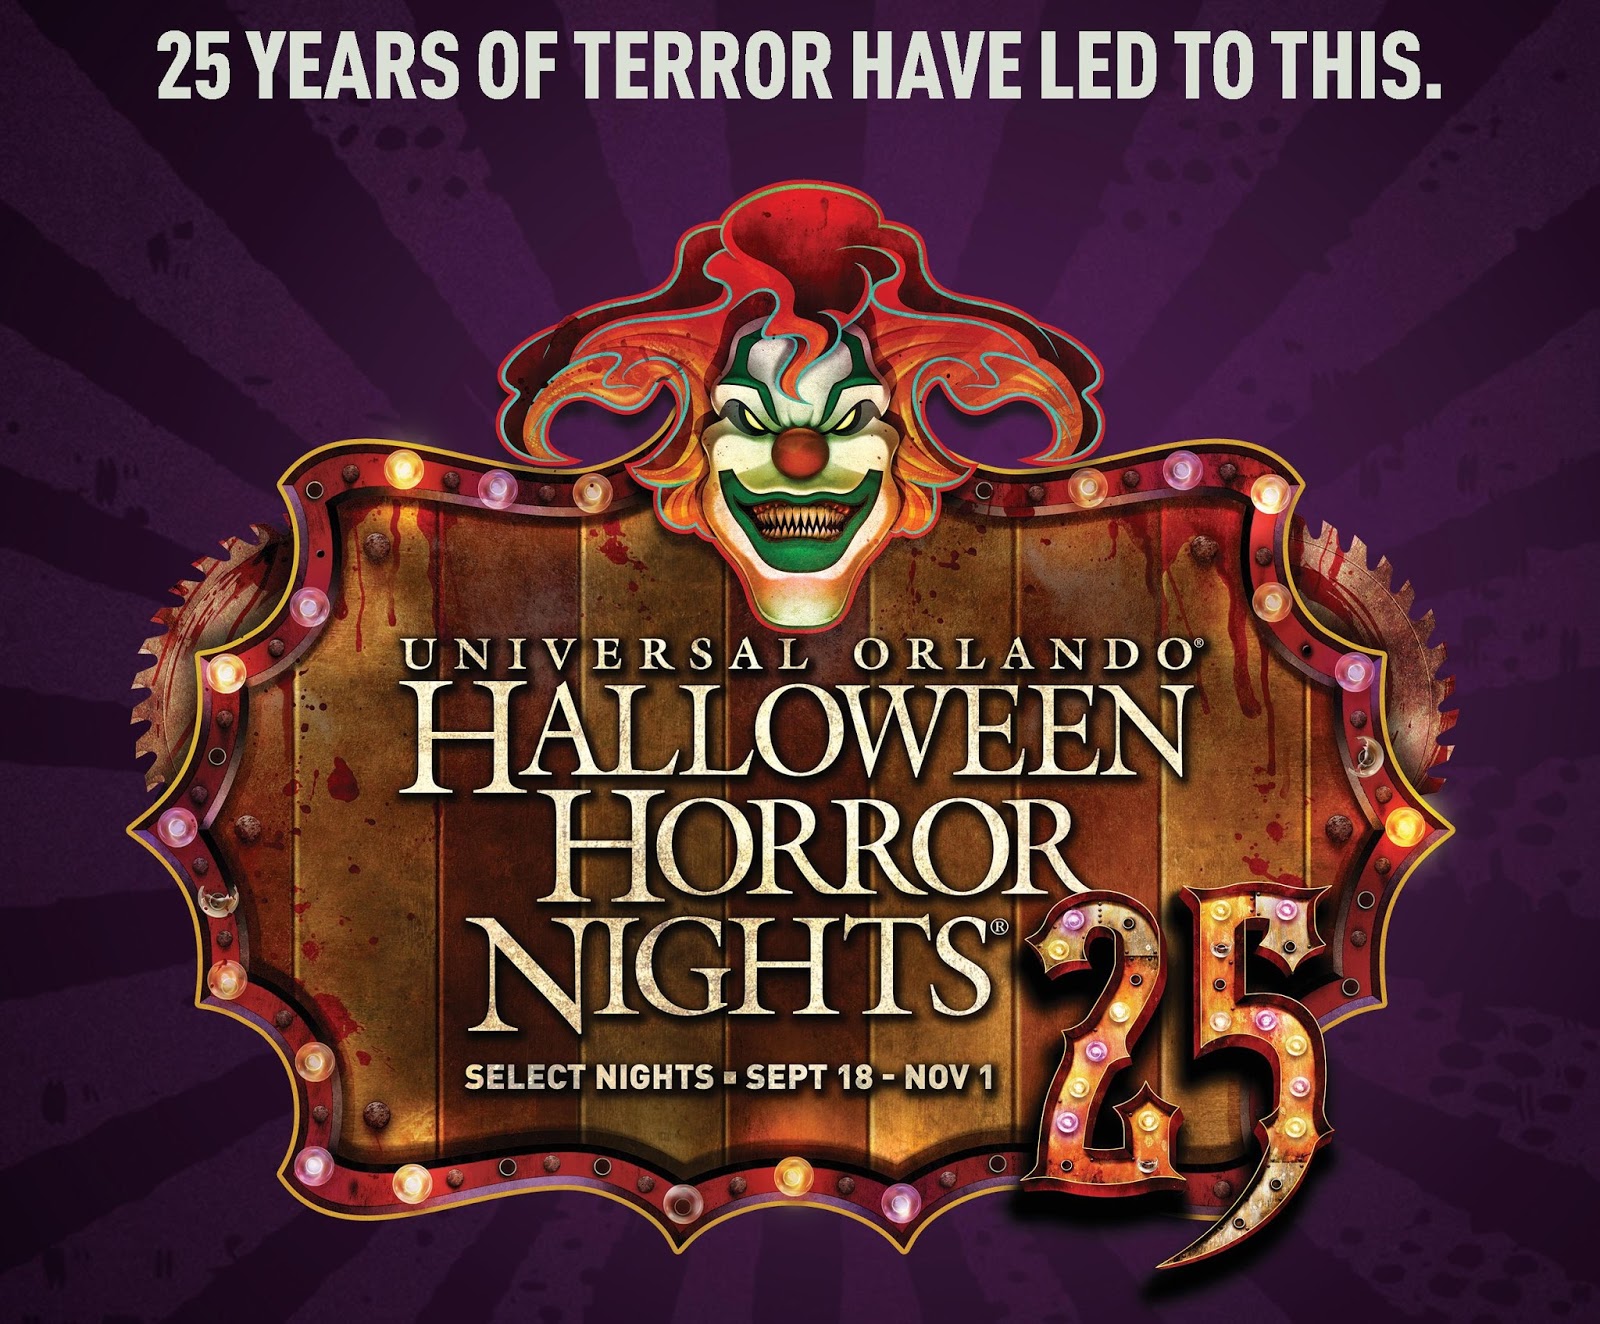 Destinations Diva Celebrate 25 Years of Halloween Horror Nights at